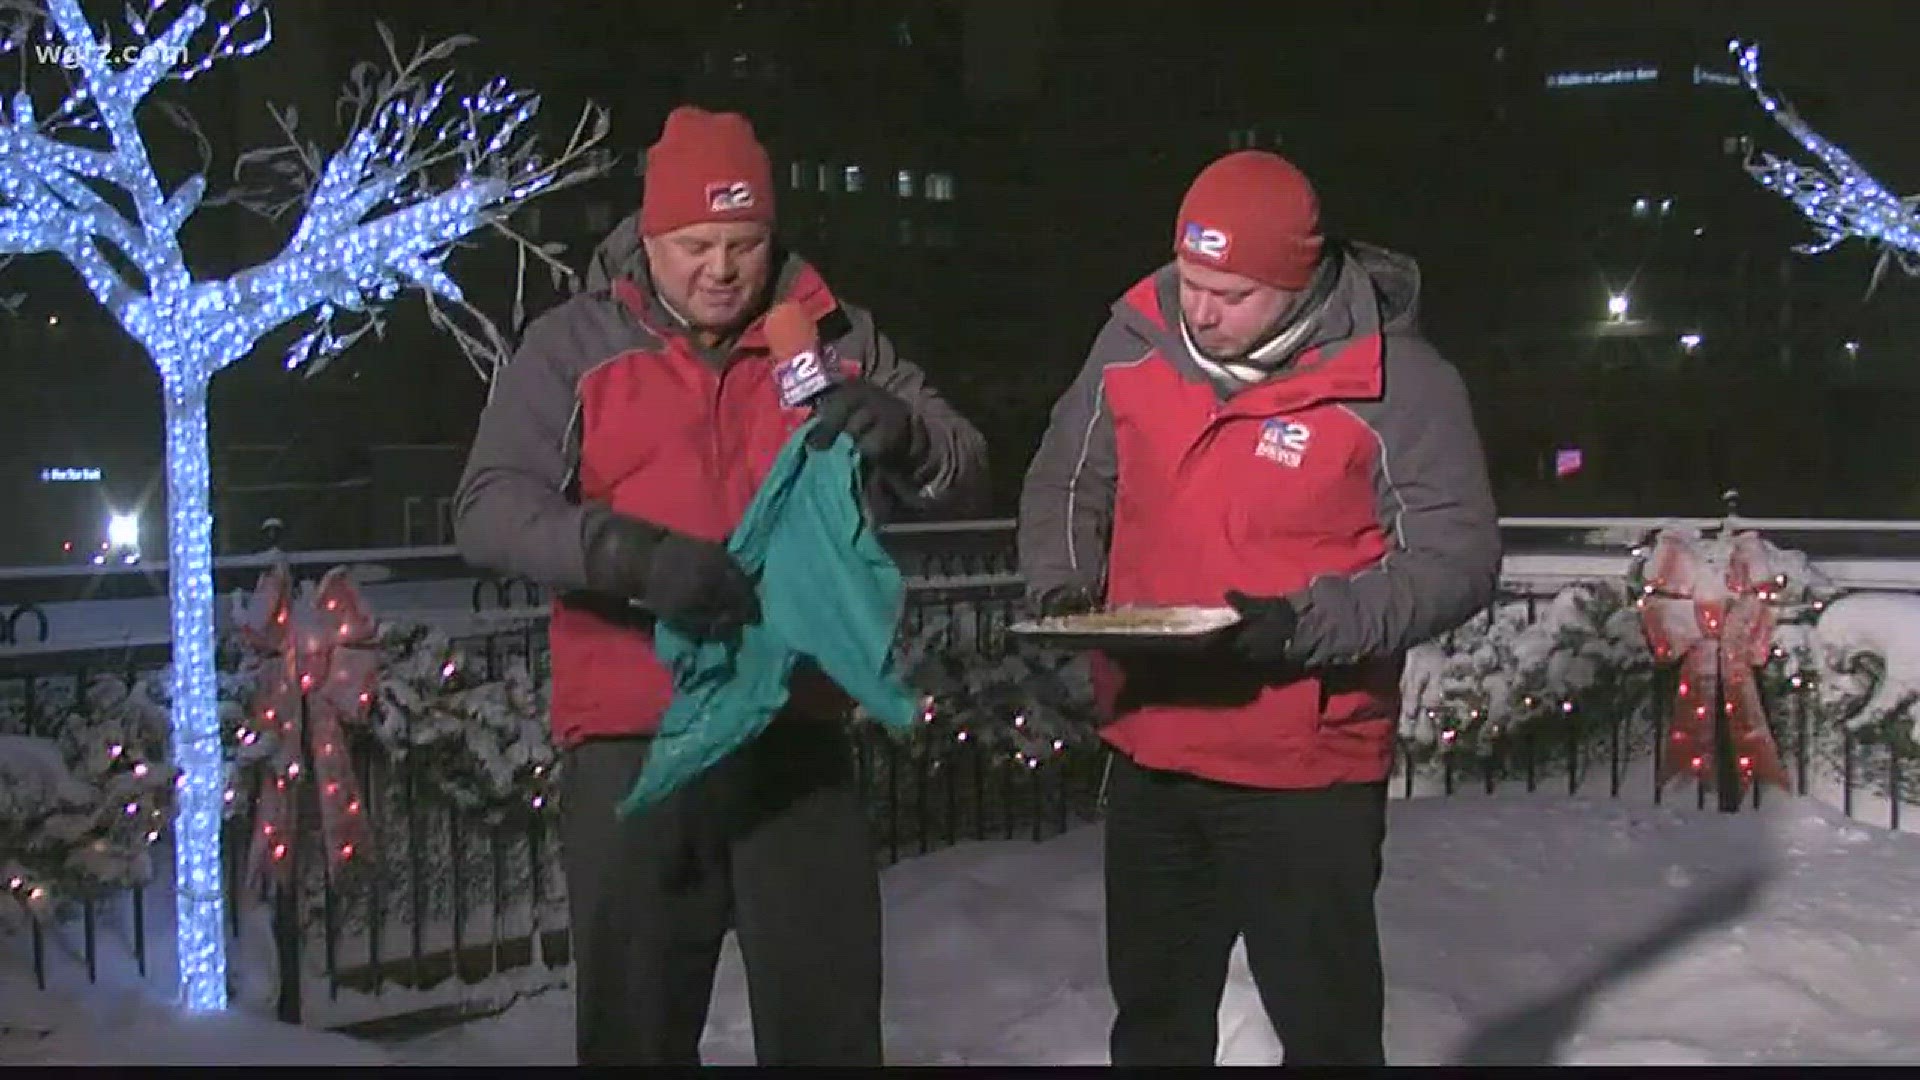 Before you go rushing outside to test some of those popular cold-weather experiments, Daybreak's Joshua Robinson and Meteorologist Patrick Hammer are testing them out so you can stay warm.